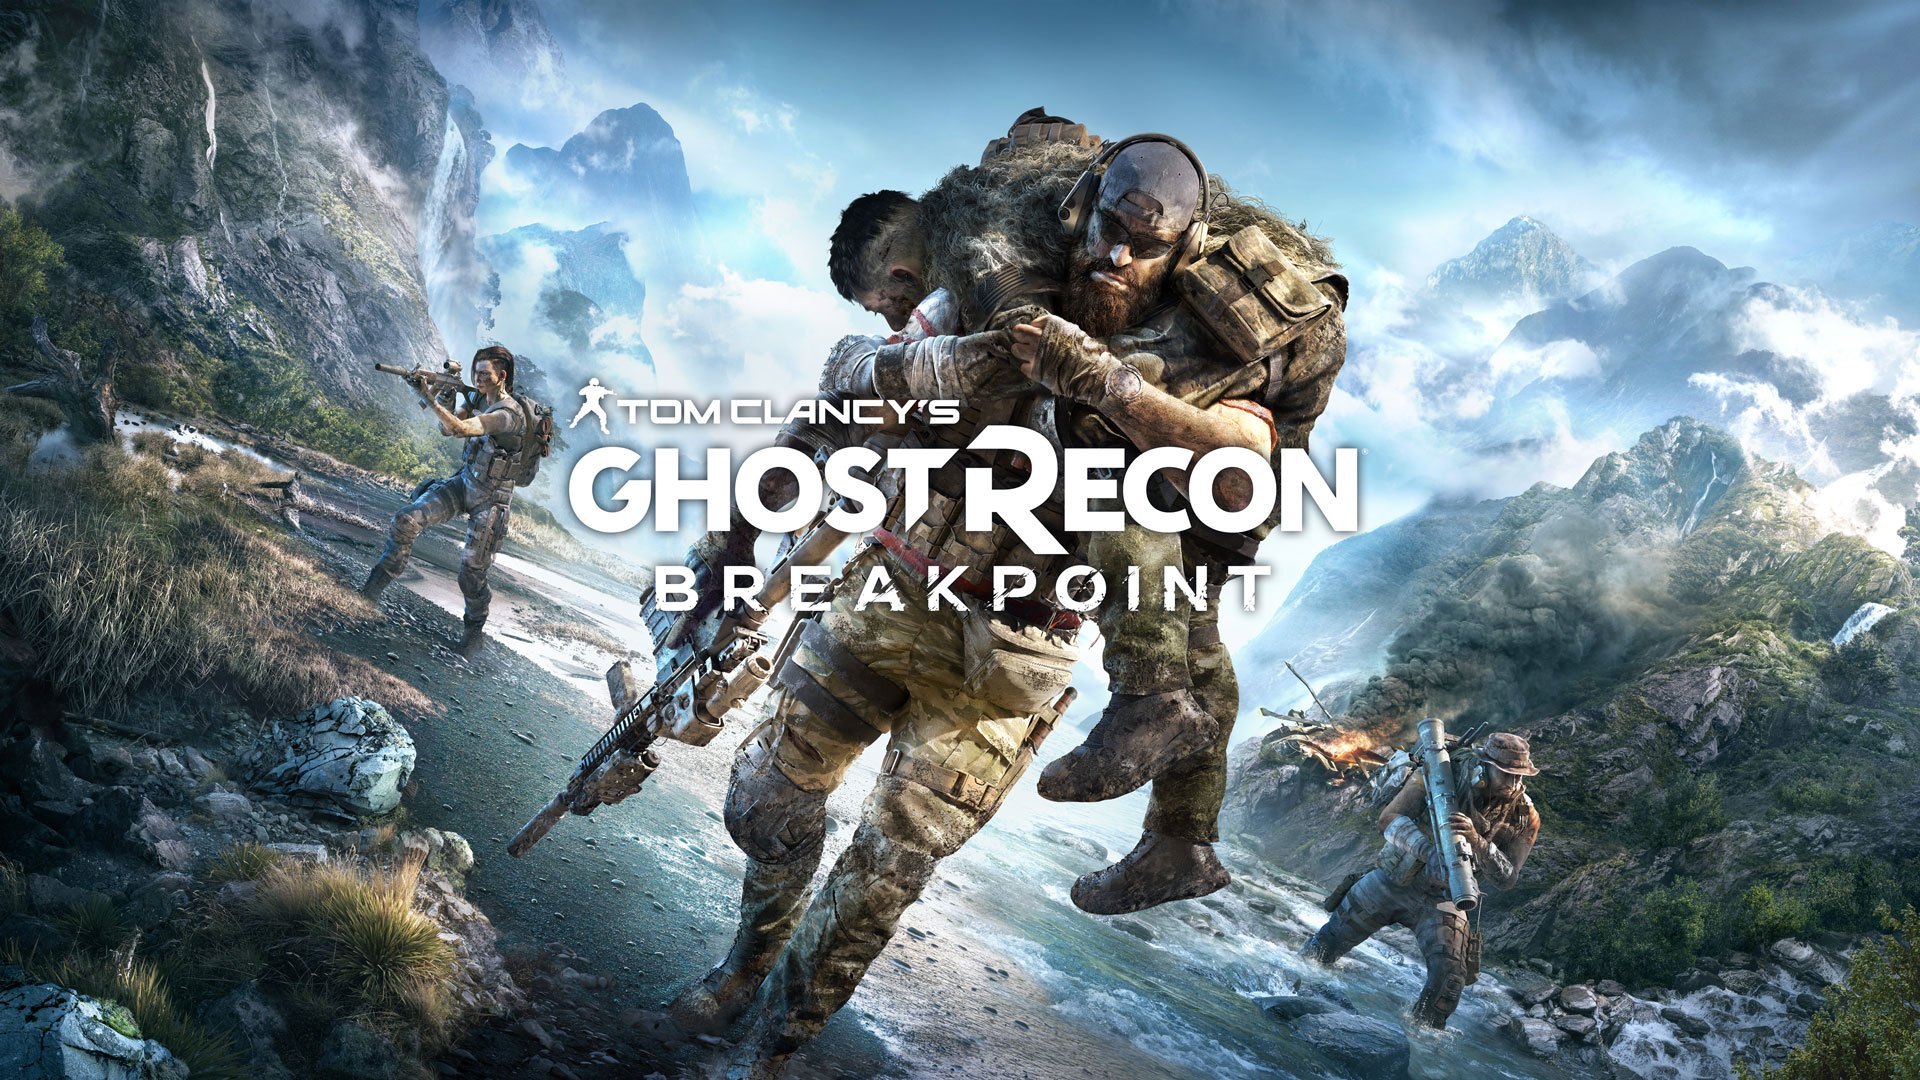 Tom Clancy's Ghost Recon Breakpoint Announced - Tom Clancy's Ghost Recon Breakpoint , HD Wallpaper & Backgrounds